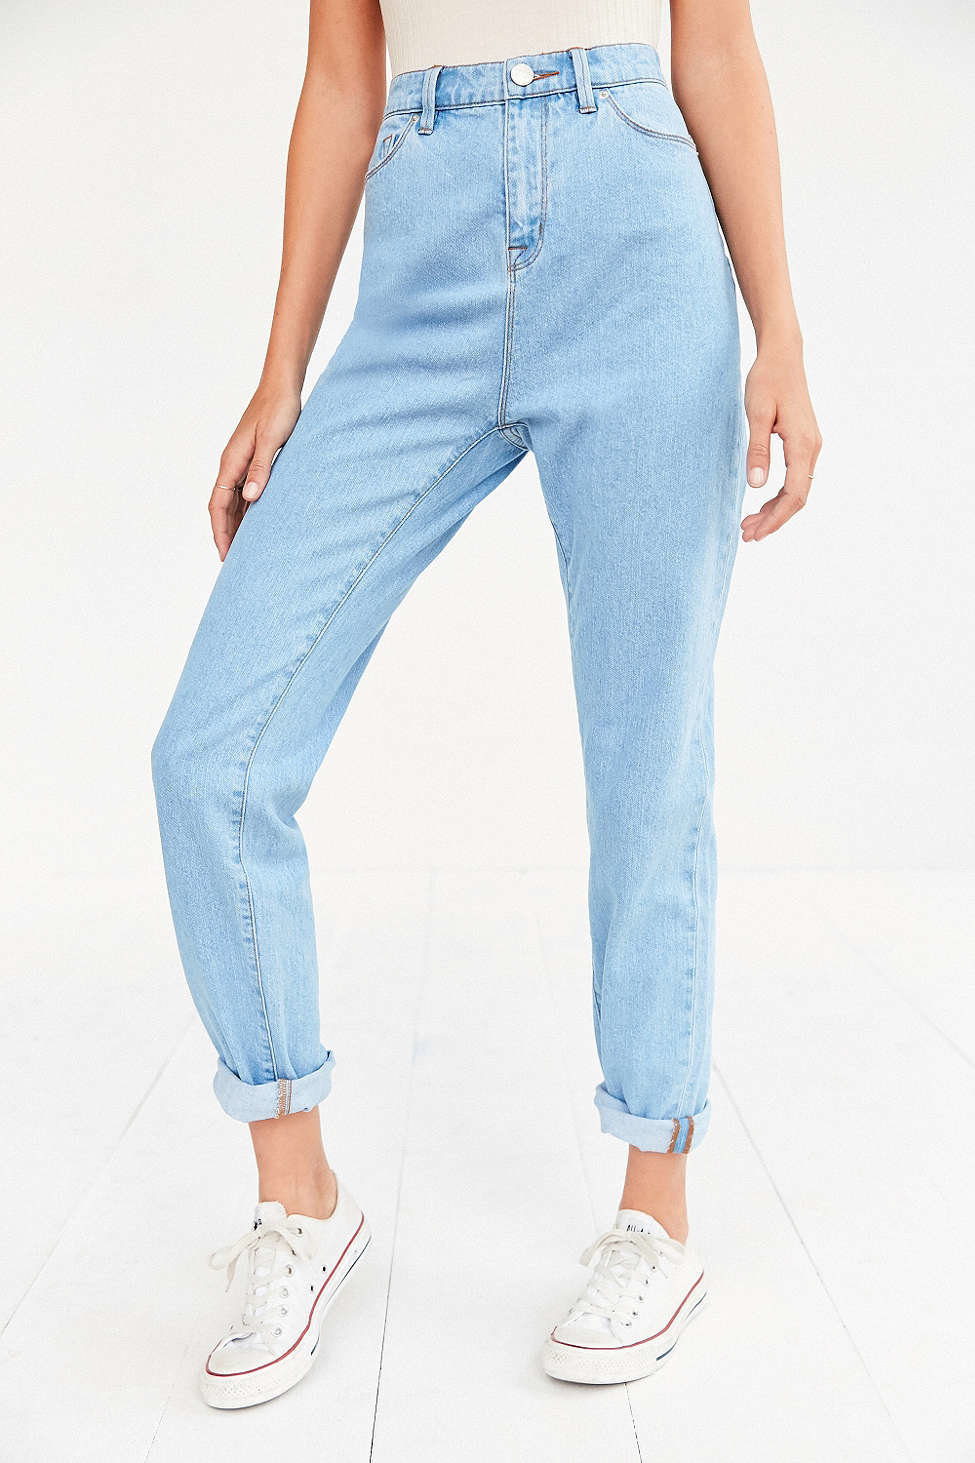 mom jeans urban outfitters. bdg mom jean ... ldxjhjr